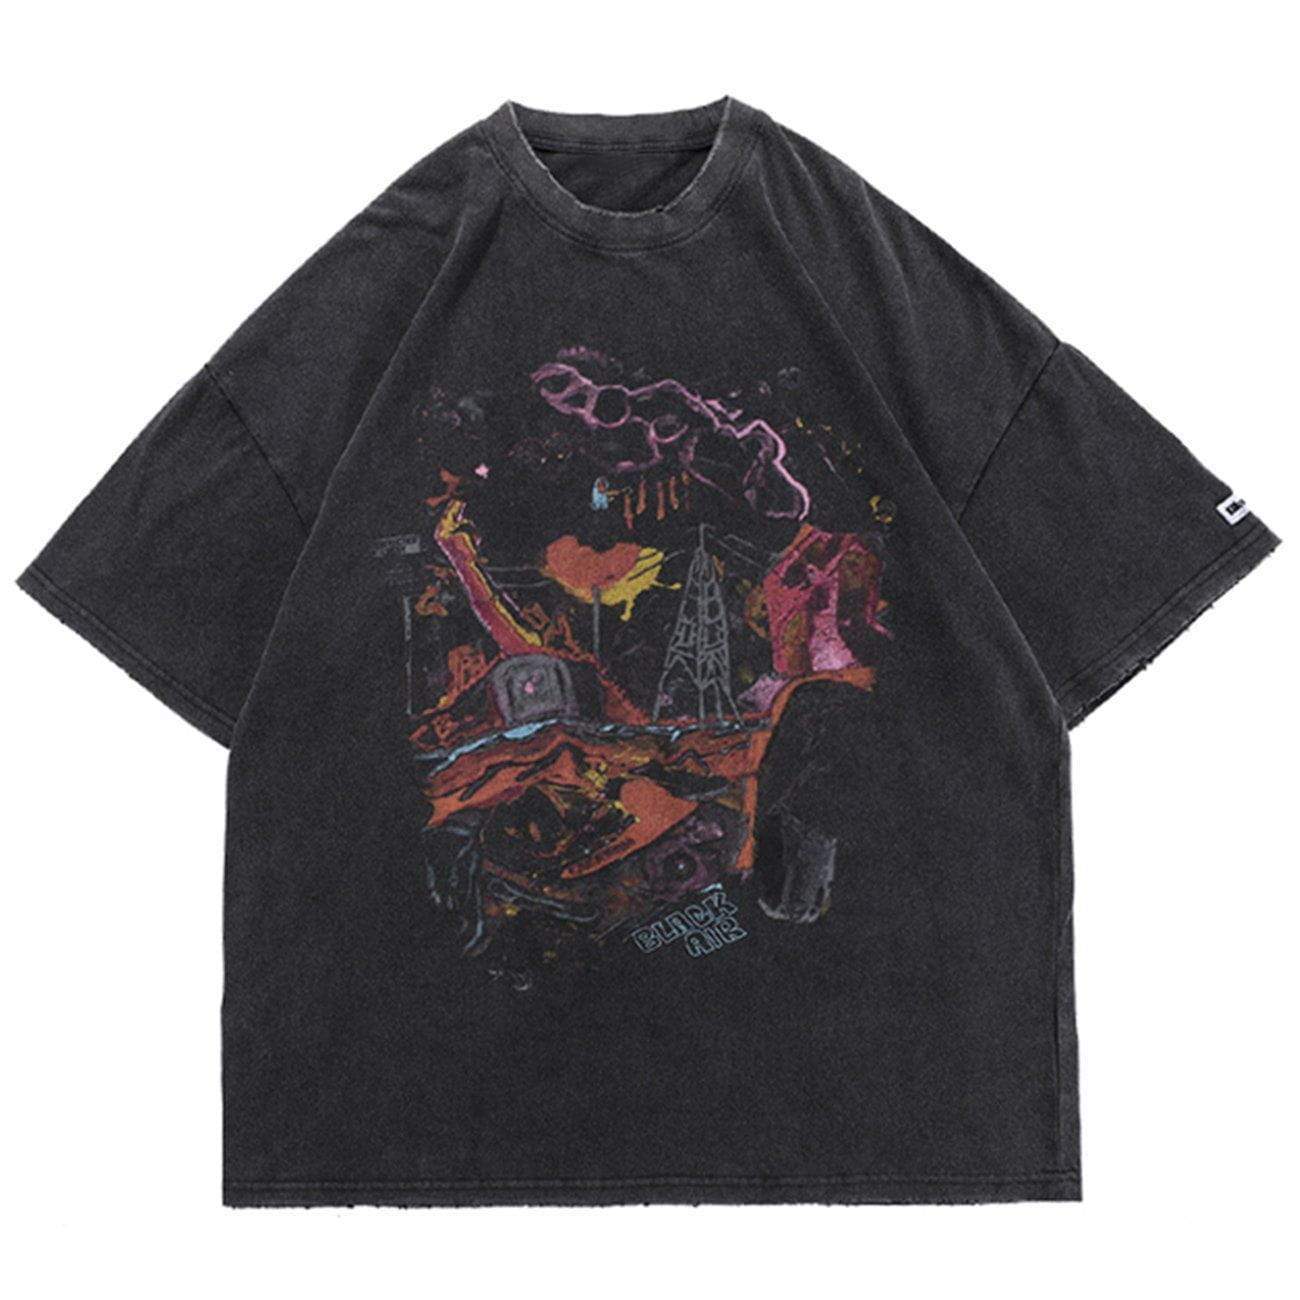 WLS Printed Graffiti Embroidered Style Soft Cotton Tee